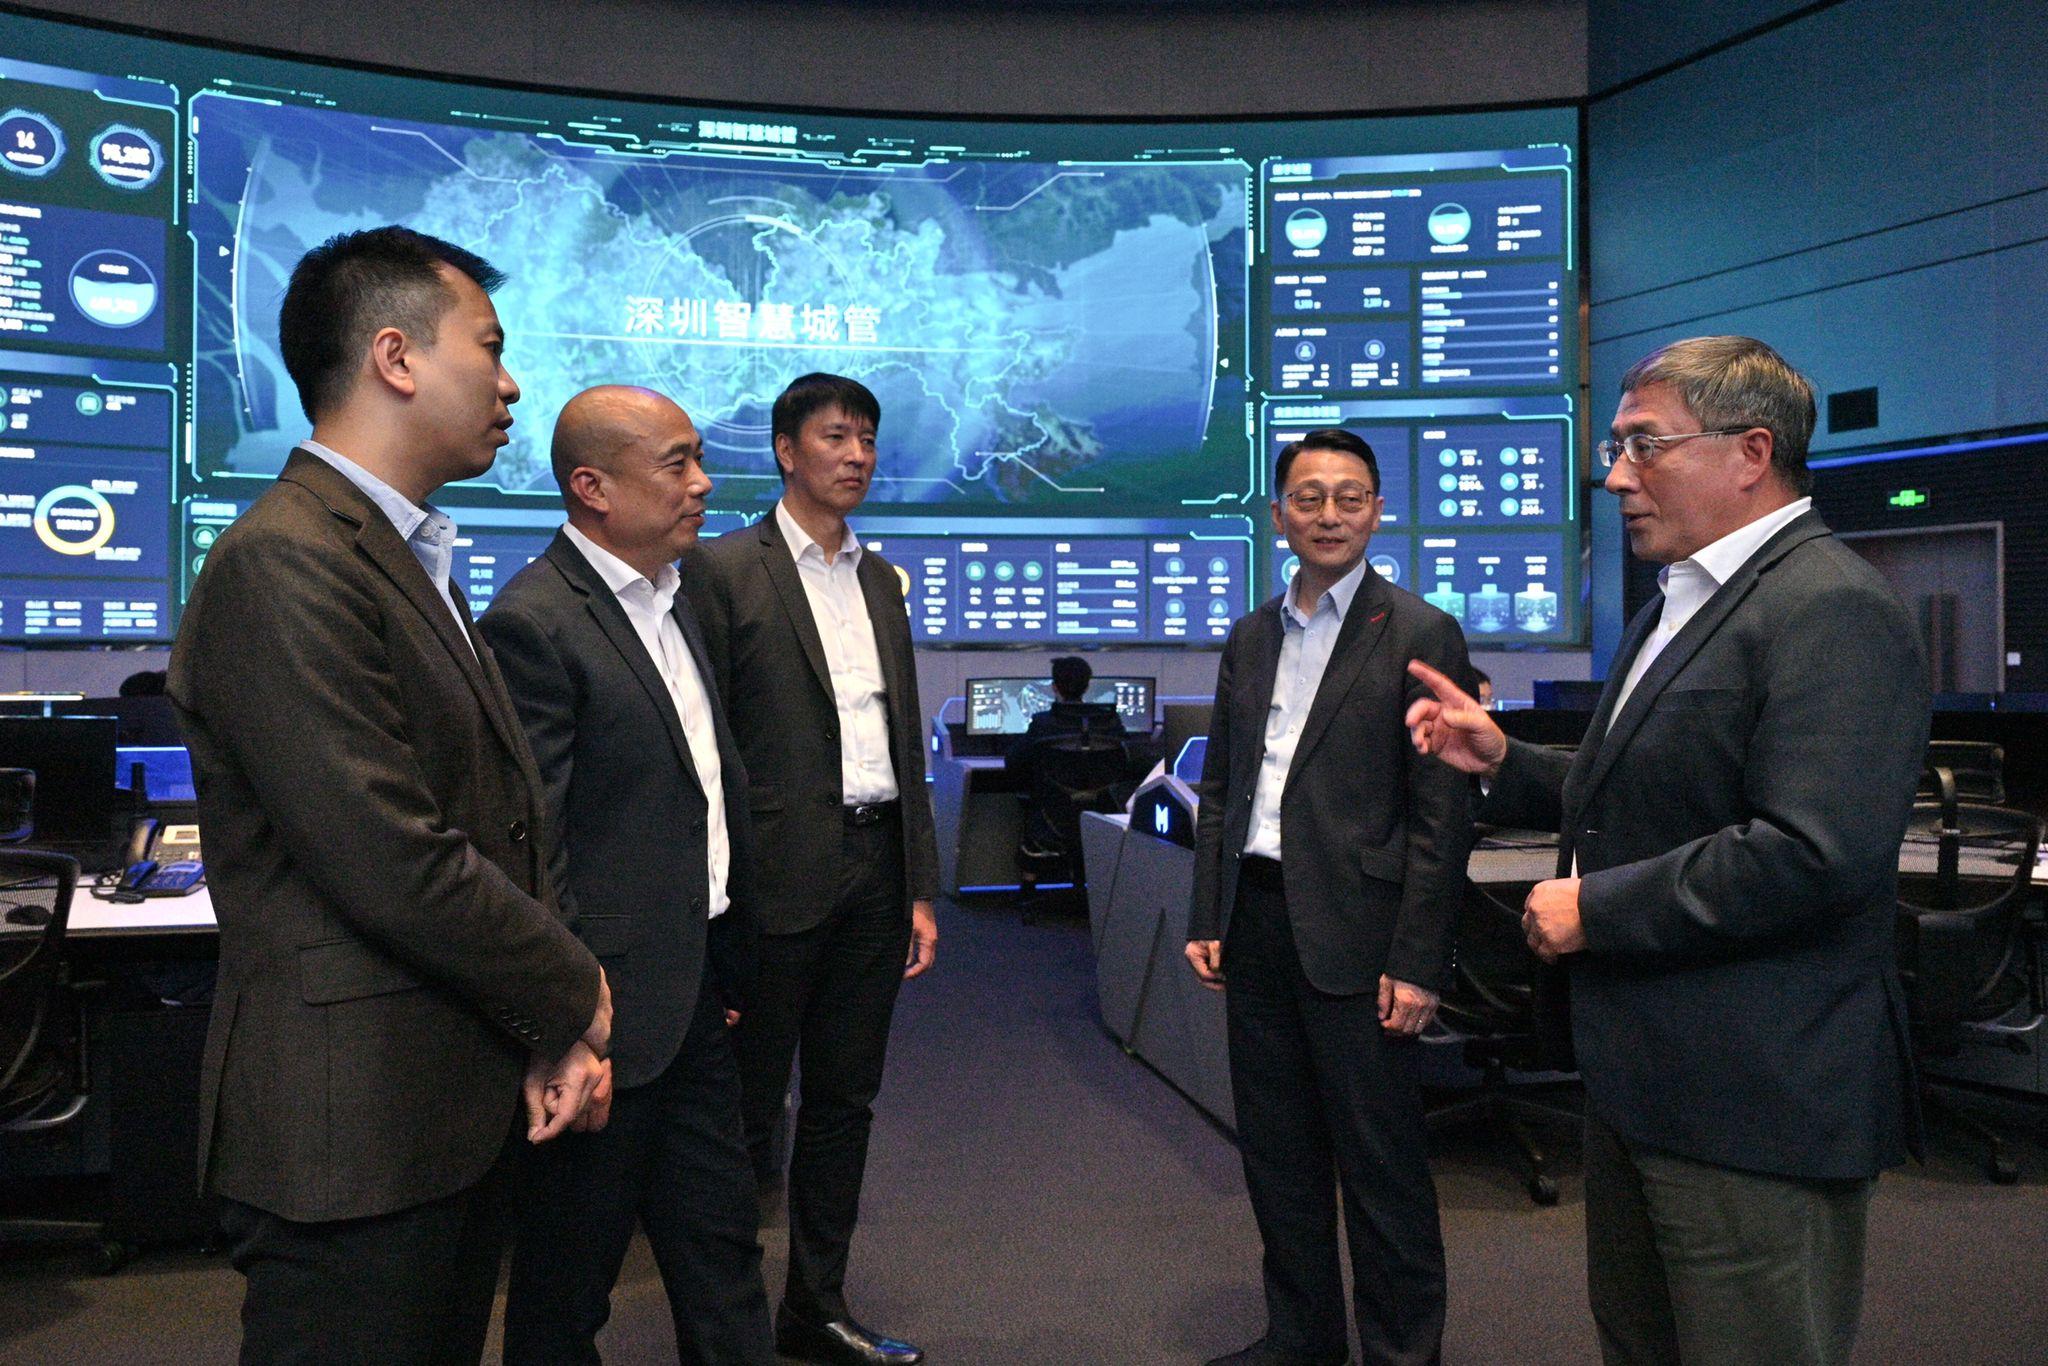 The Deputy Chief Secretary for Administration, Mr Cheuk Wing-hing (first right), together with the Director of Highways, Mr Jimmy Chan (third left), and the Director of Leisure and Cultural Services, Mr Vincent Liu (second right), visited the Shenzhen Intelligent Operation Center for Urban Management today (March 23) to understand the development of smart urban management in Shenzhen.